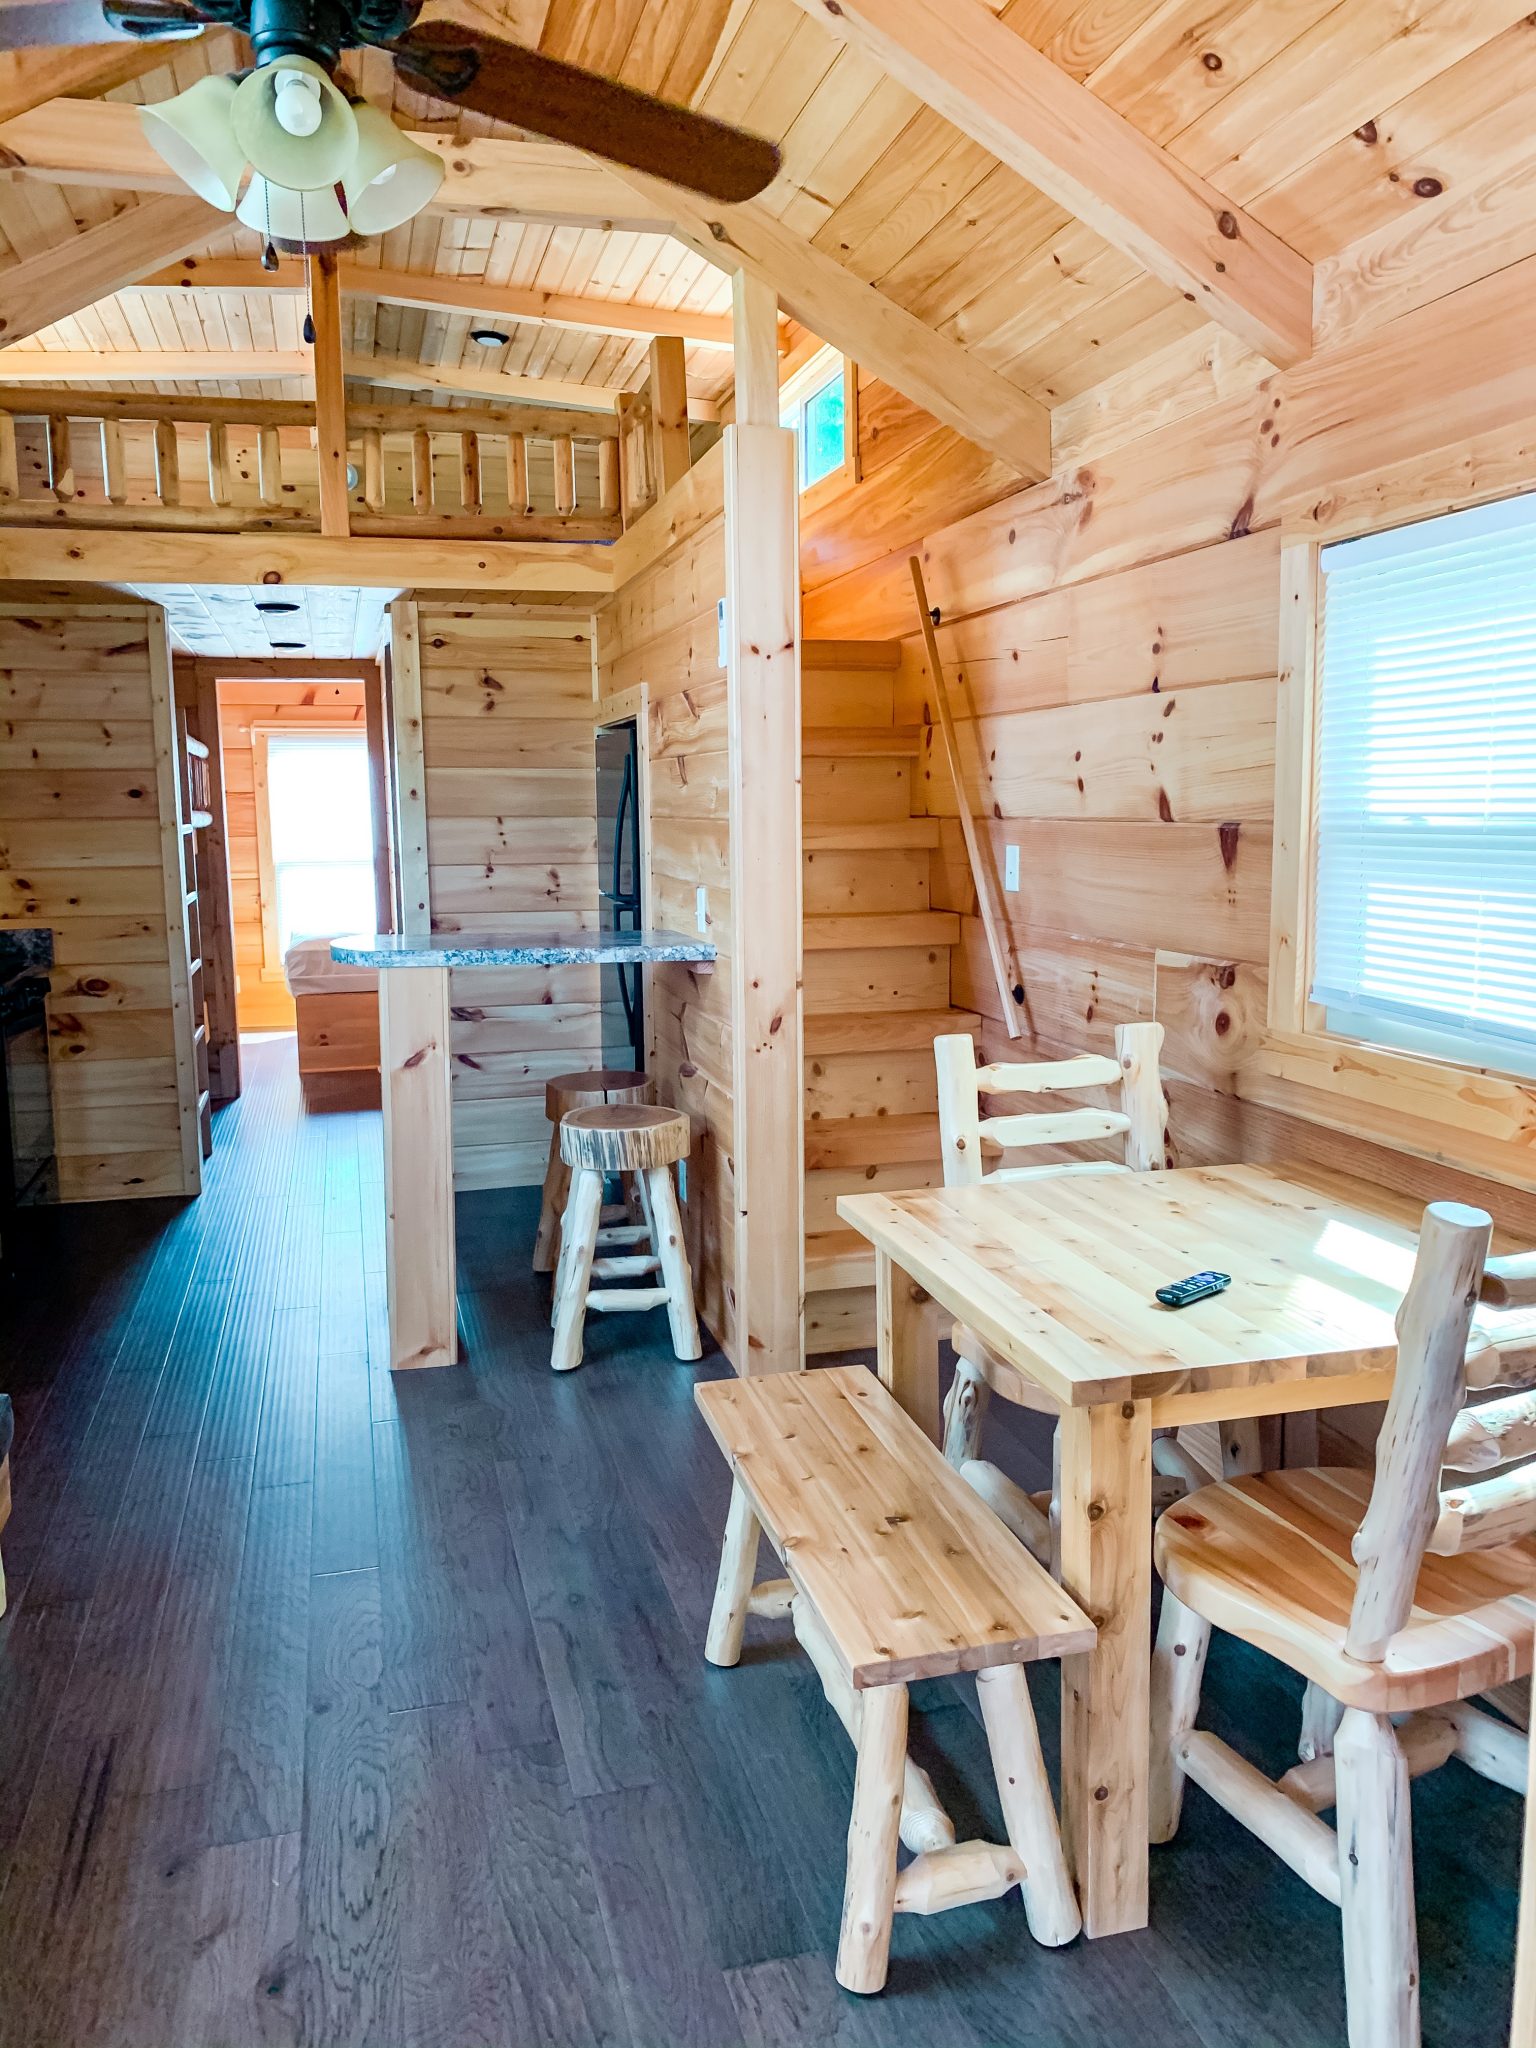 Sycamore Loft Cabin, Jellystone Golden Valley, North Carolina Camping, Glamping, Stilettos and Diapers